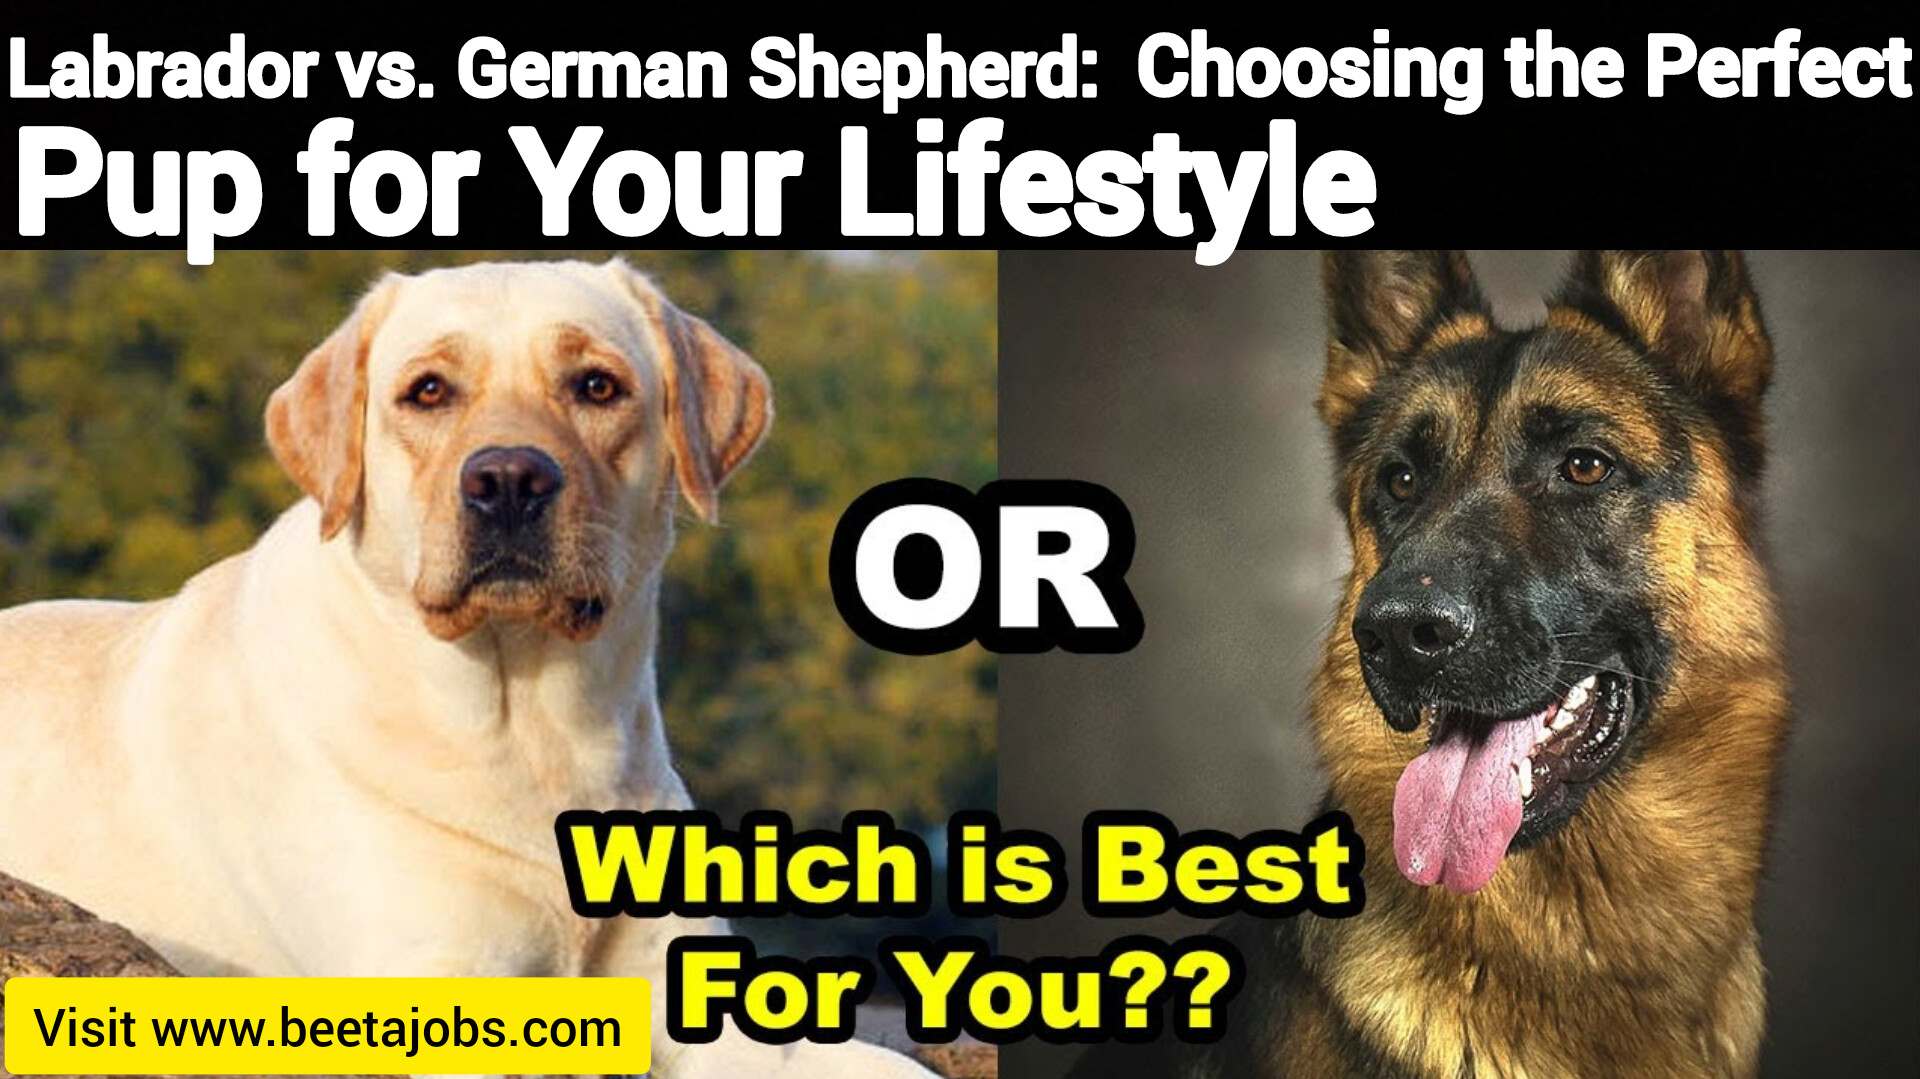 Labrador vs German Shepherd: Choosing the Perfect Pup for Your Lifestyle